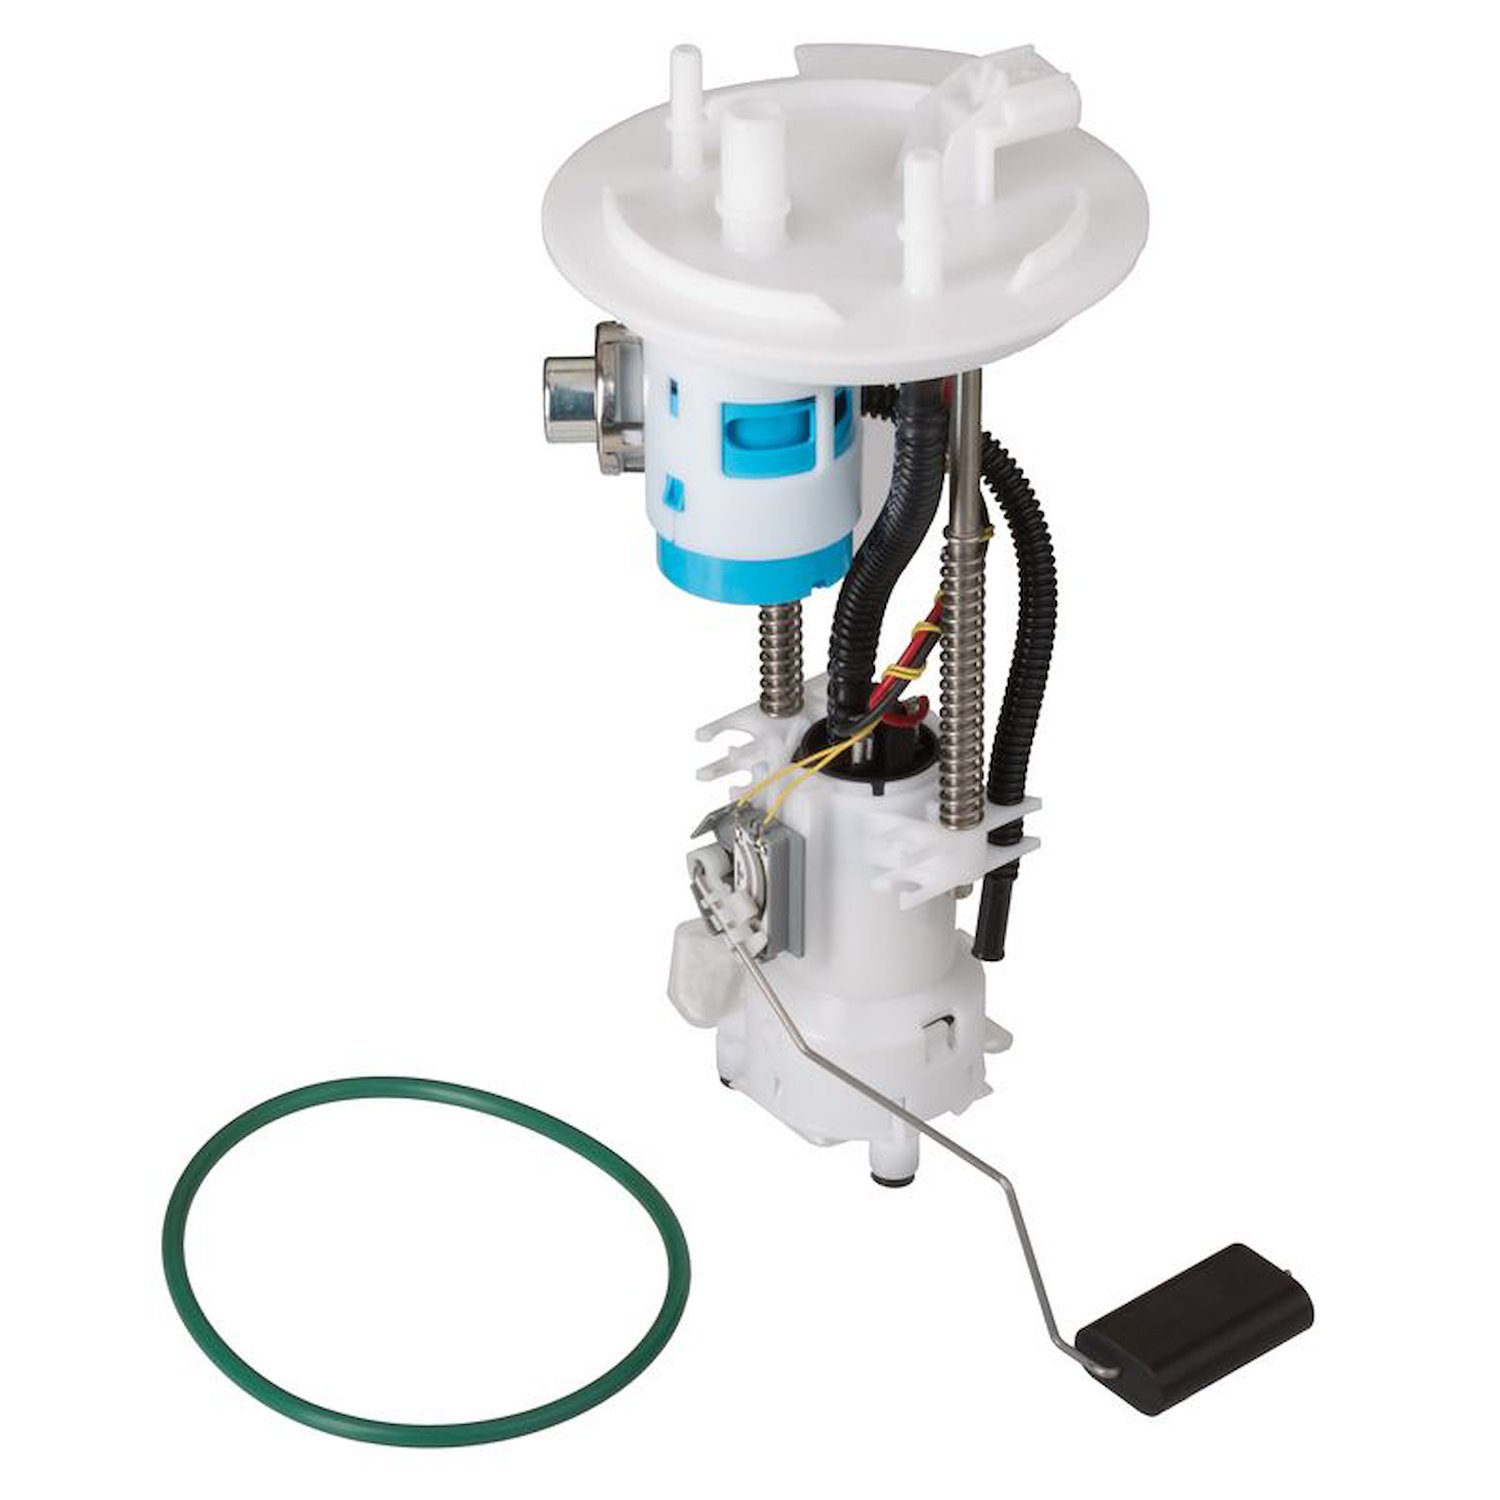 OE Ford/Lincoln Replacement Fuel Pump Module Assembly for 2005-2008 Ford Expedition/2007-2008 Lincoln Navigator